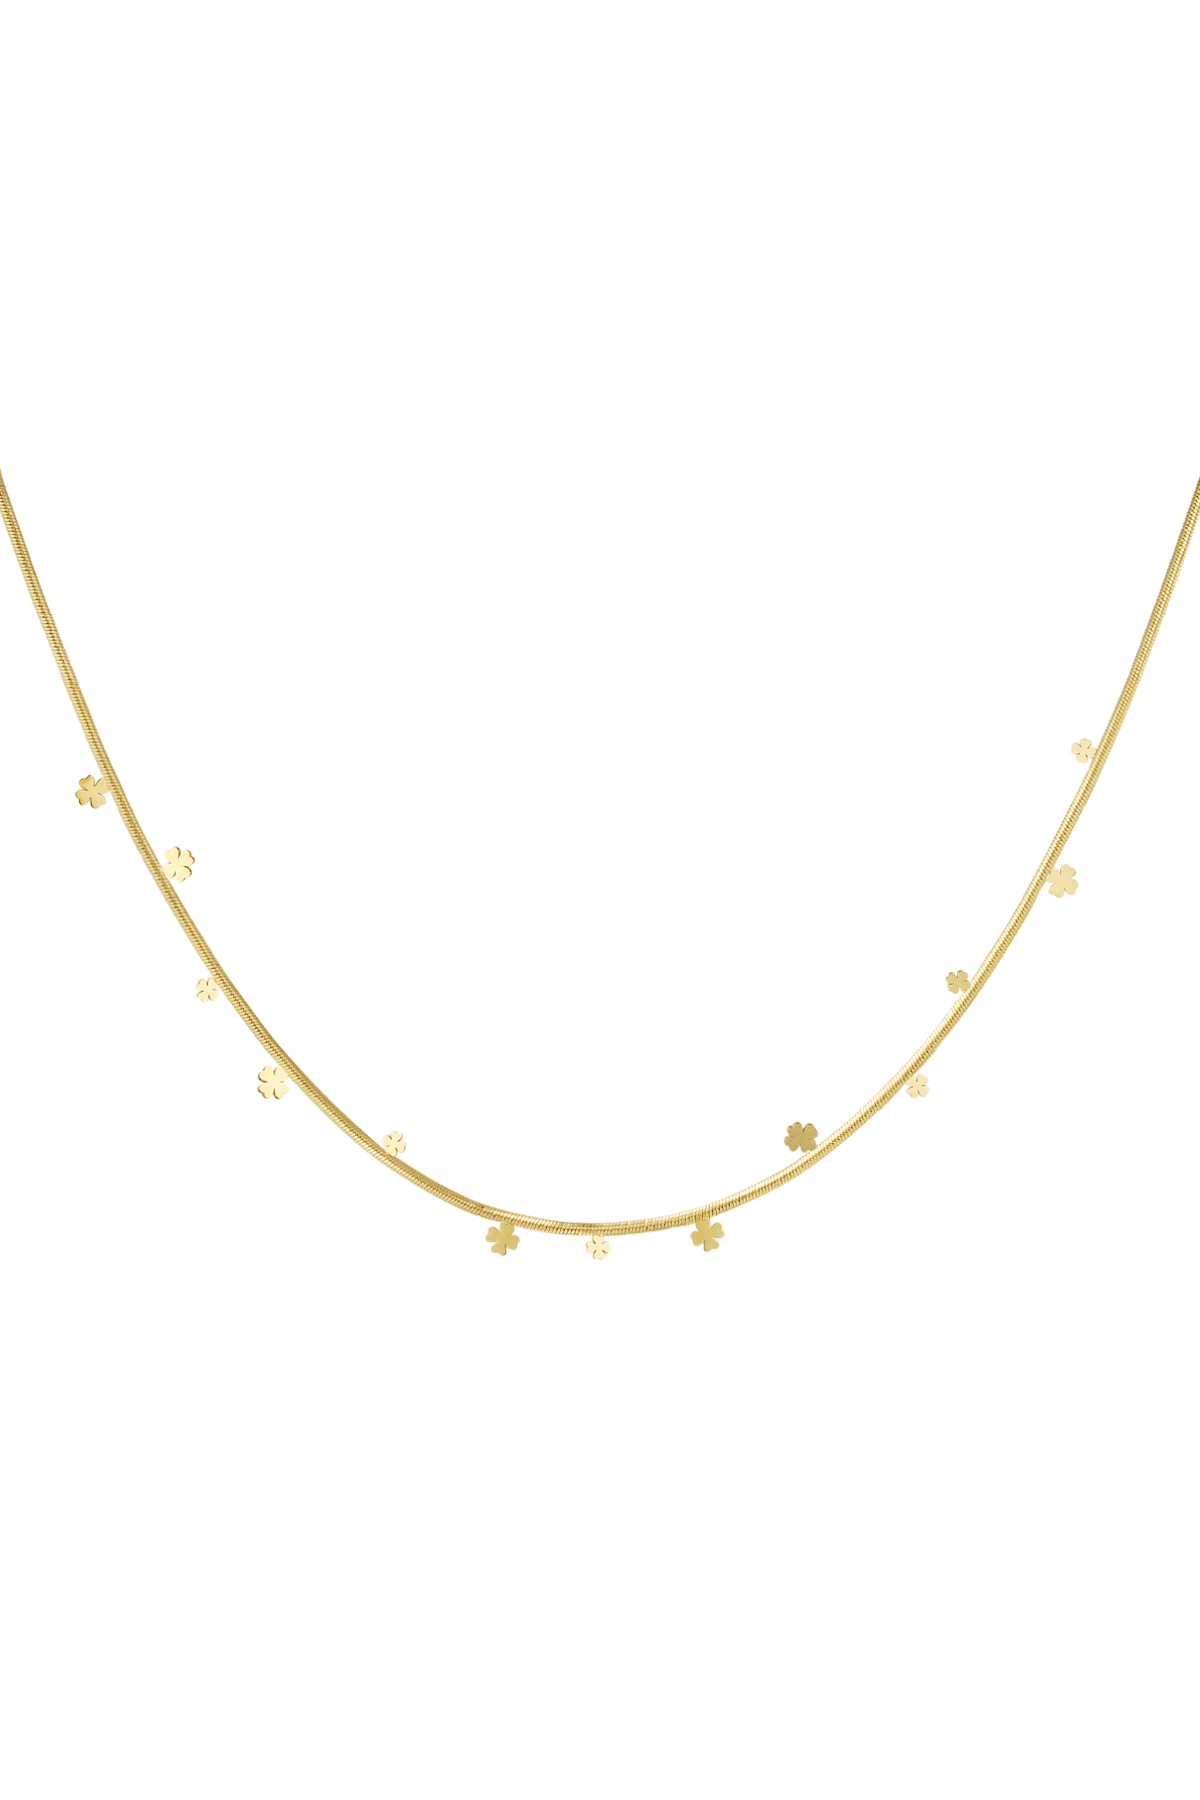 Clover party necklace - gold h5 